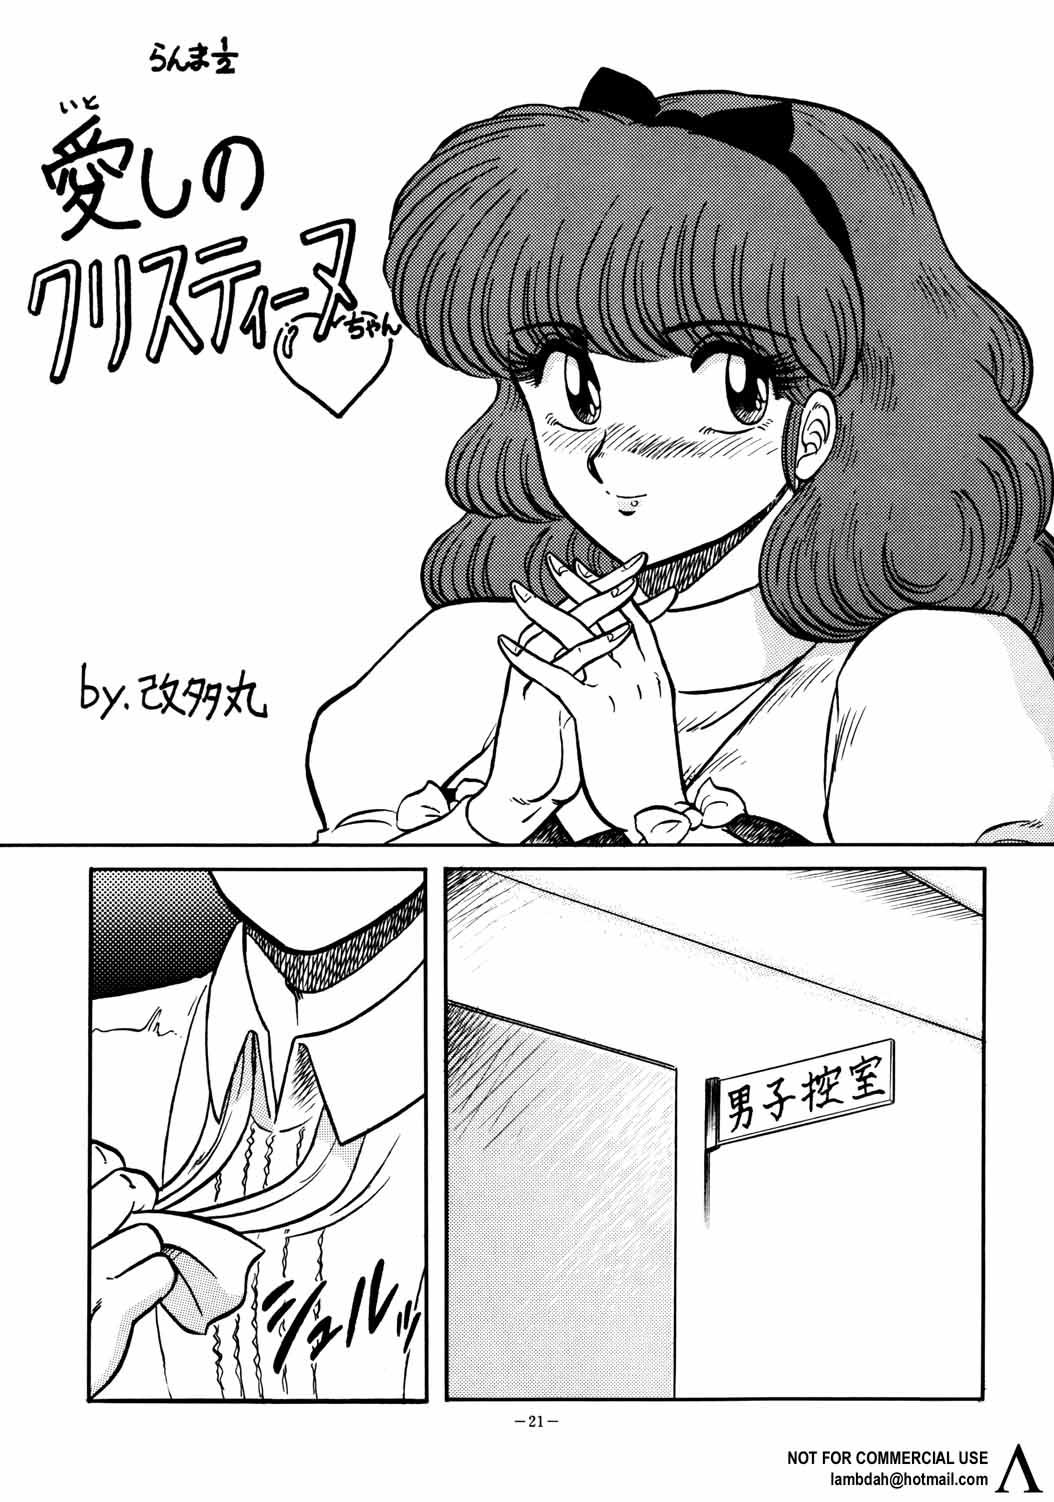 Wanking Look Out 26 - Sailor moon Ranma 12 Video girl ai Horny - Page 9